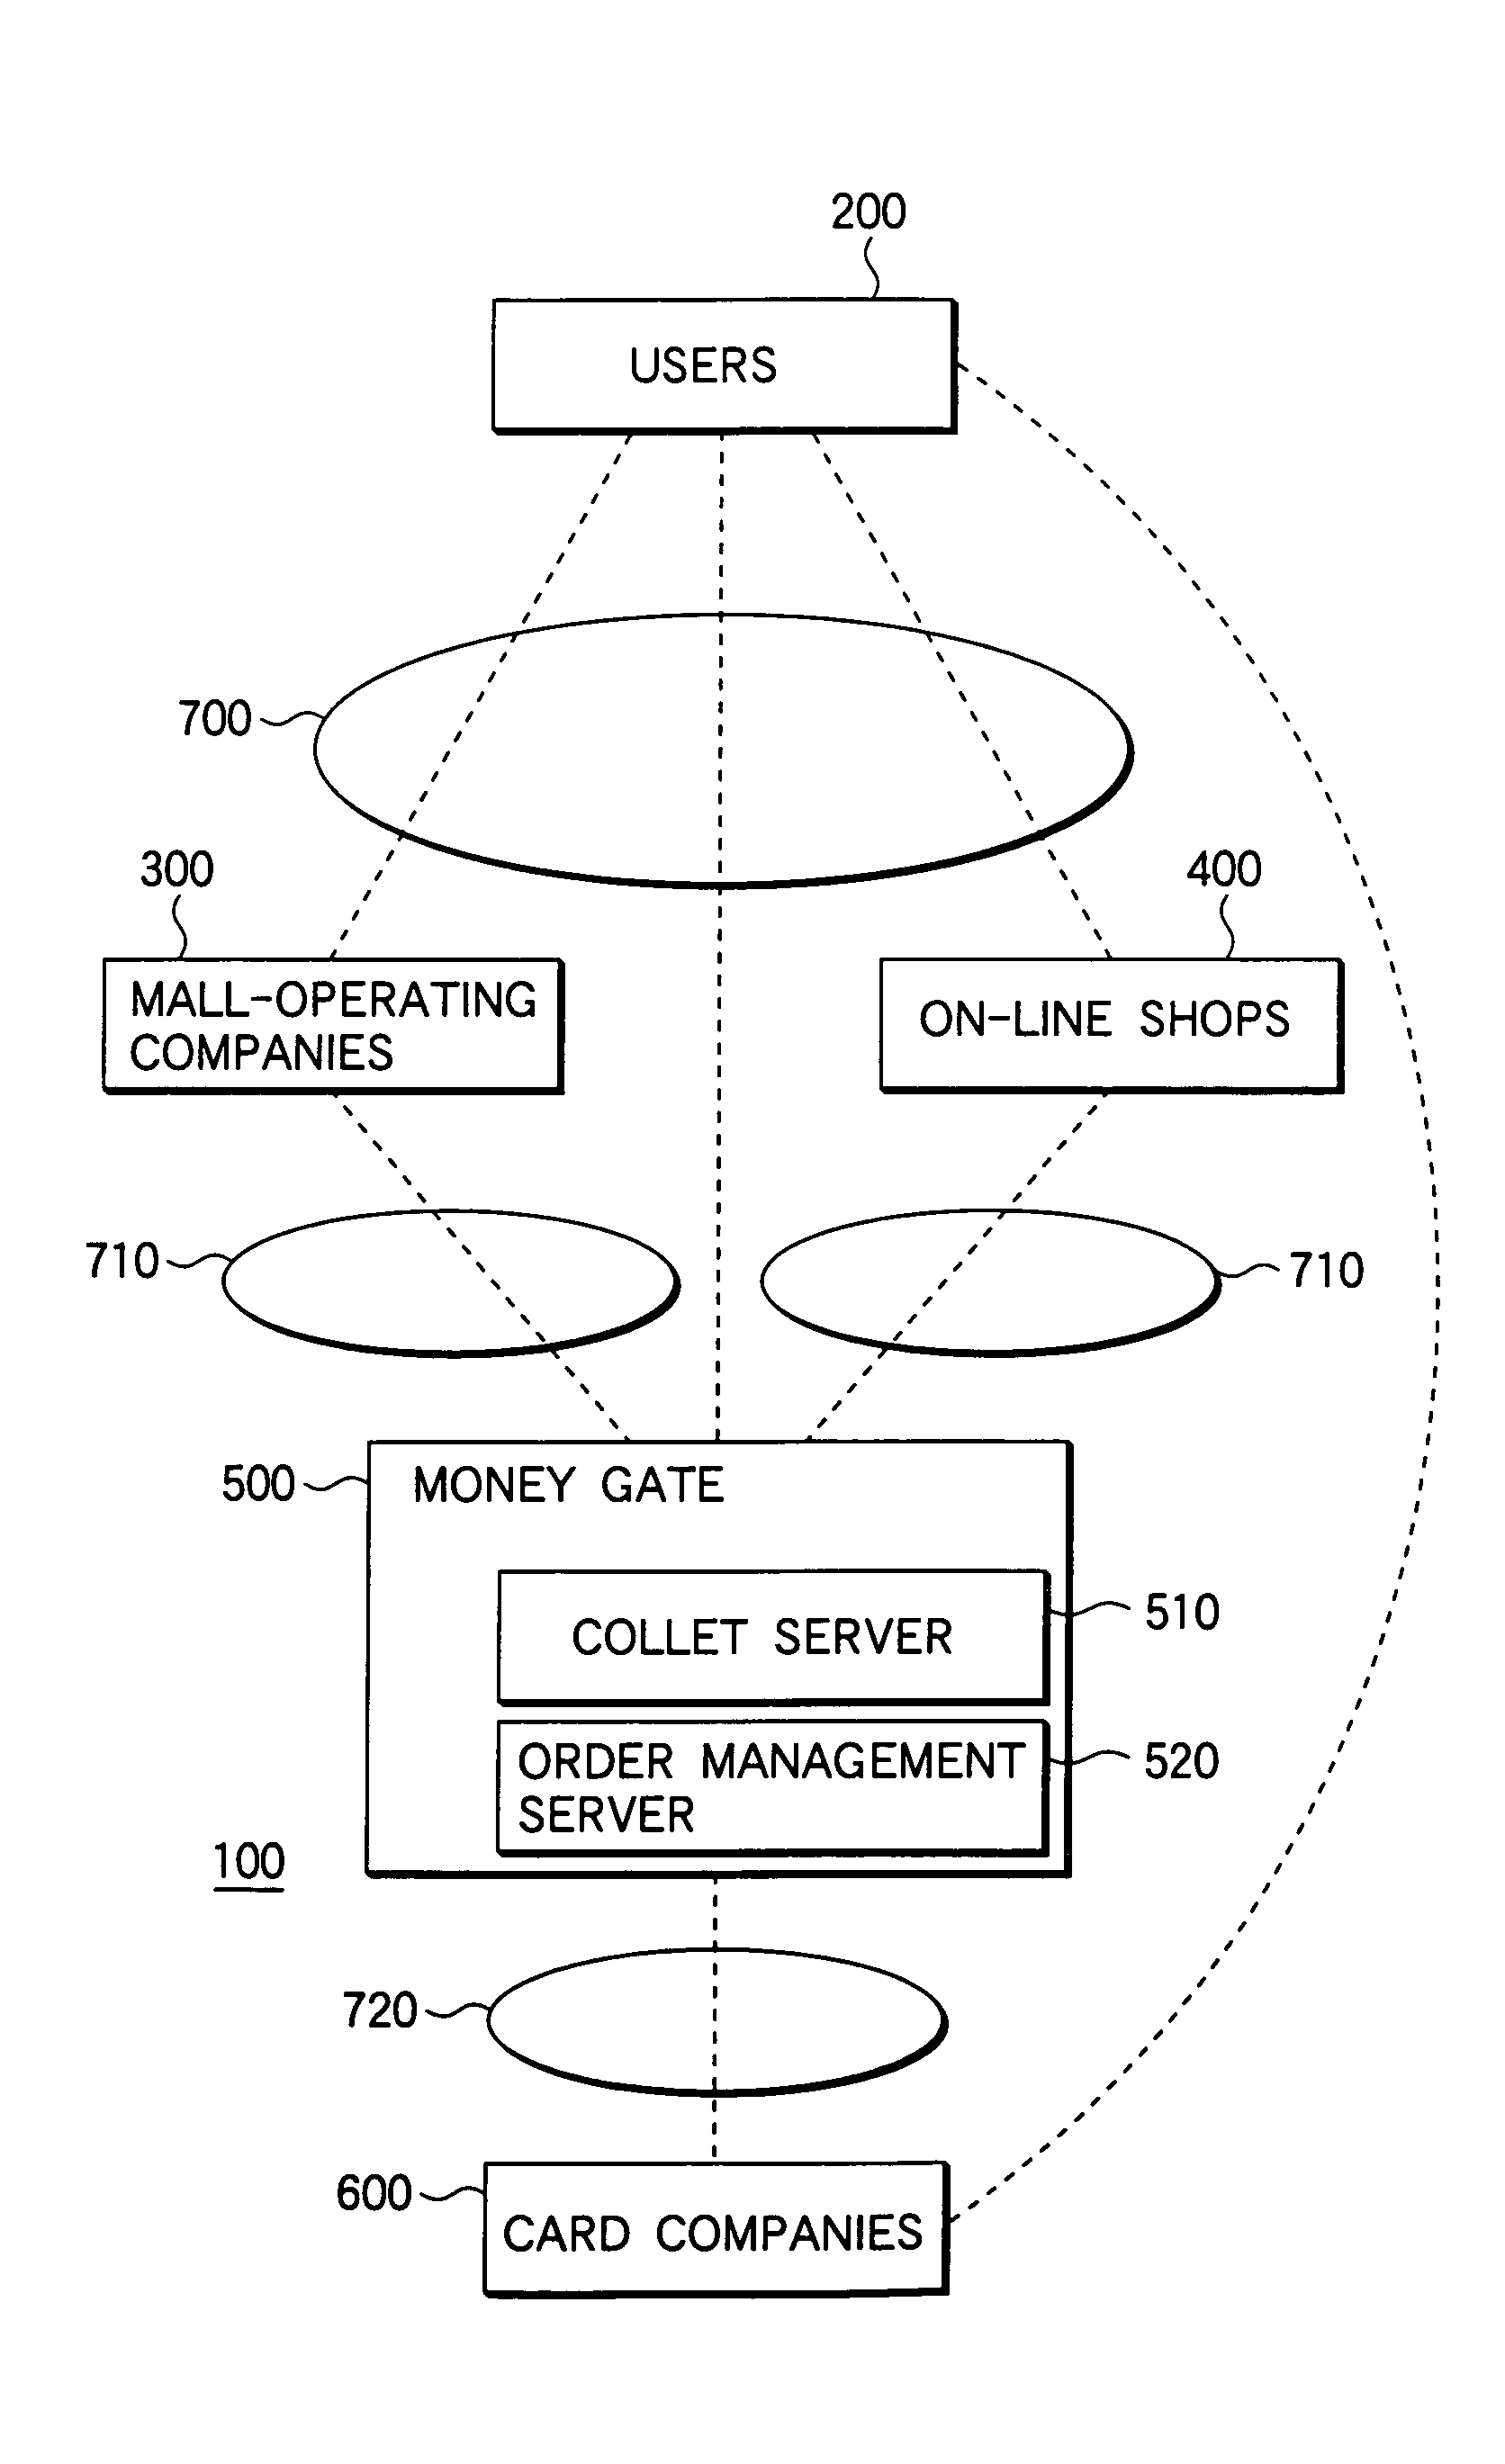 Settlement intermediation processing apparatus, storage medium in which a program for settlement intermediation processing is stored, computer program for settlement intermediation, online shop apparatus, and on-line shopping method and system